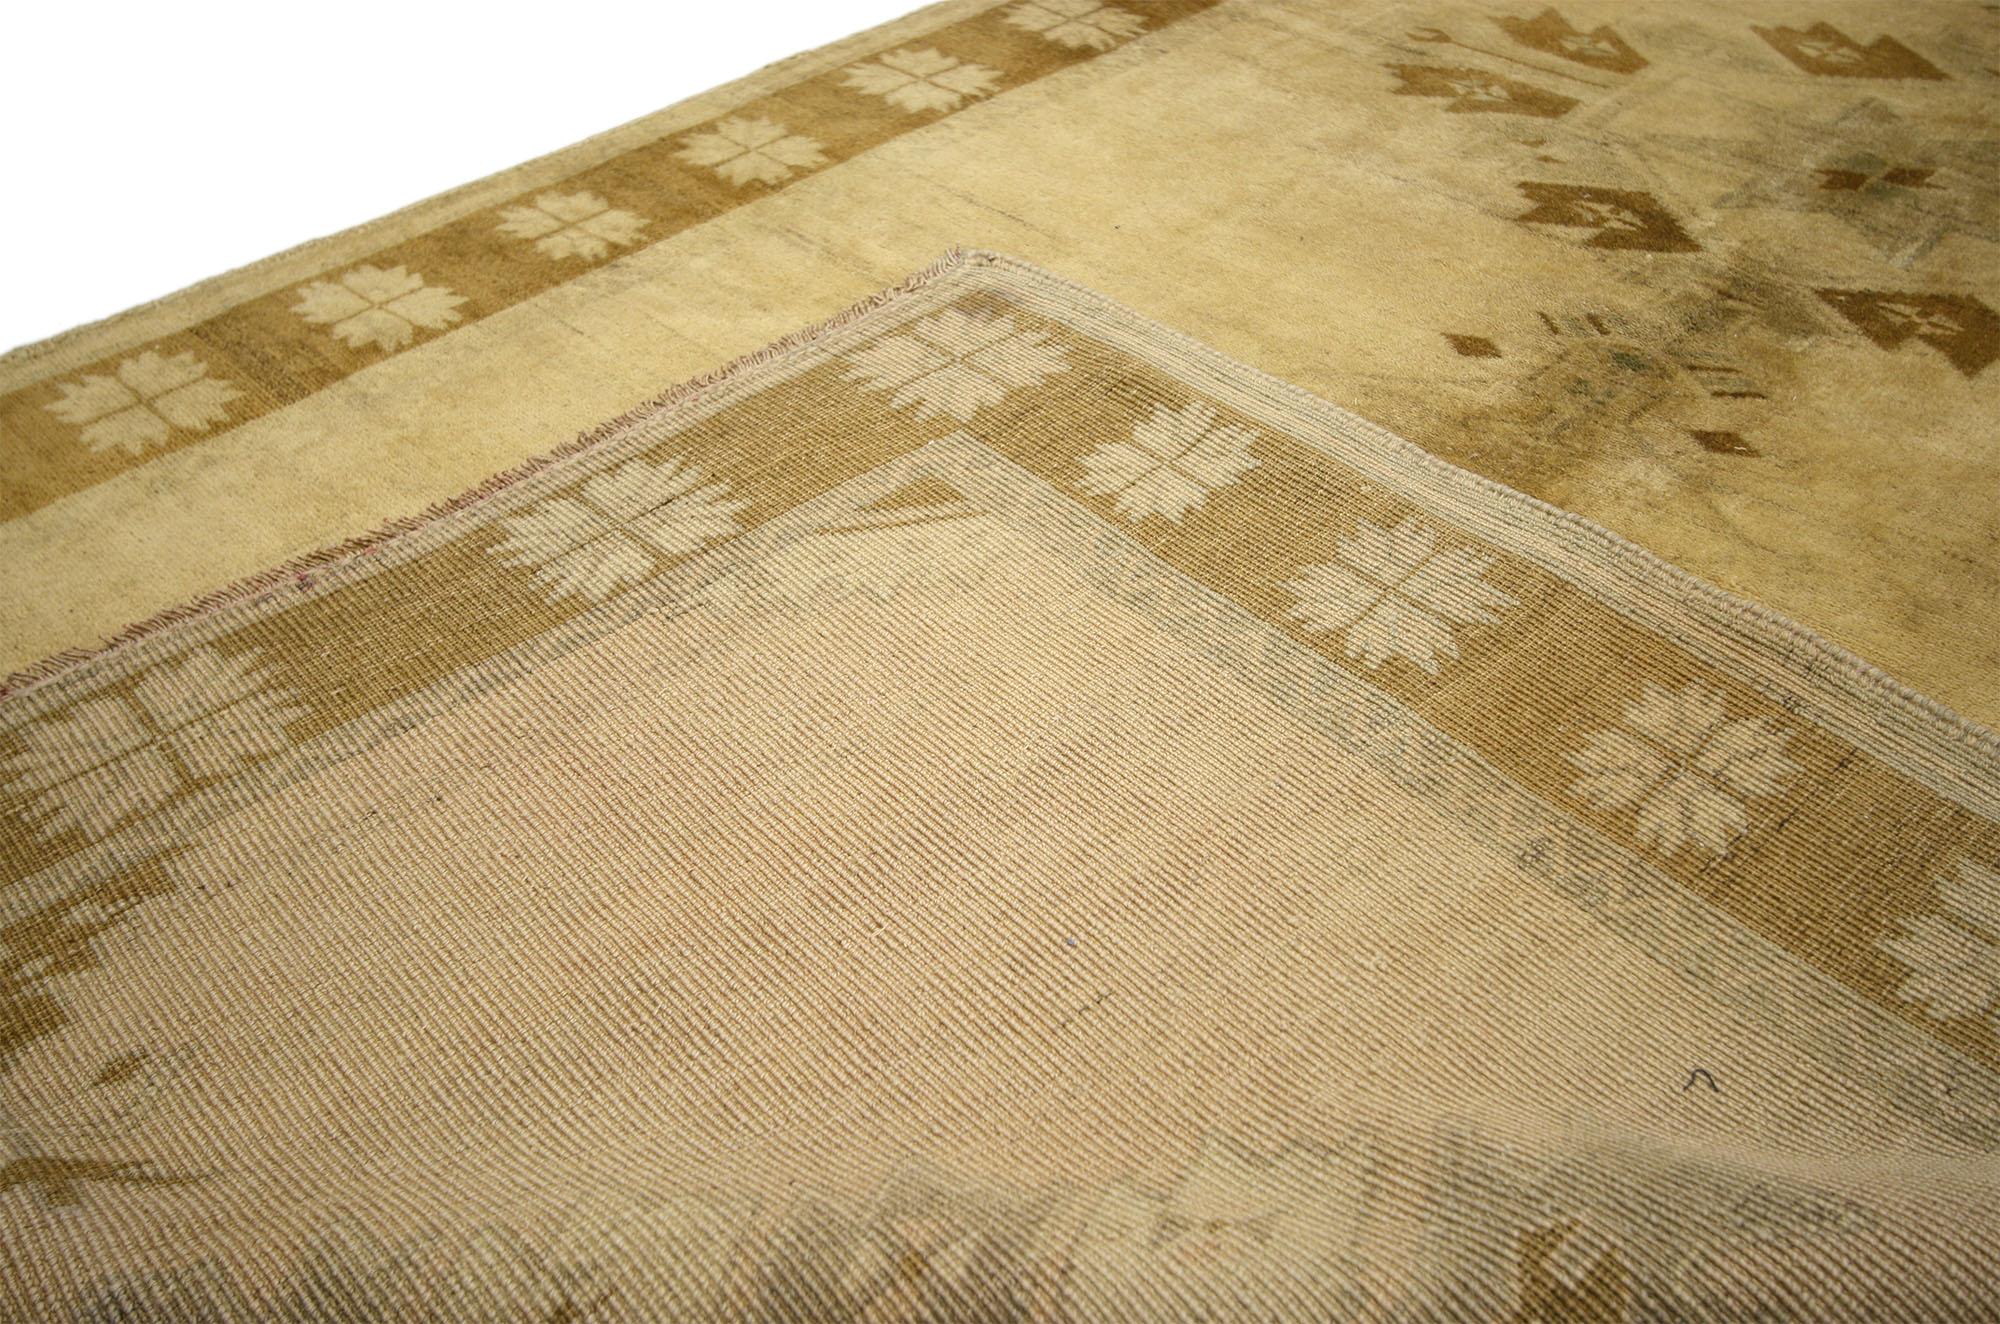 Wool Warm and Neutral Vintage Turkish Oushak Gallery Rug, Wide Hallway Runner For Sale